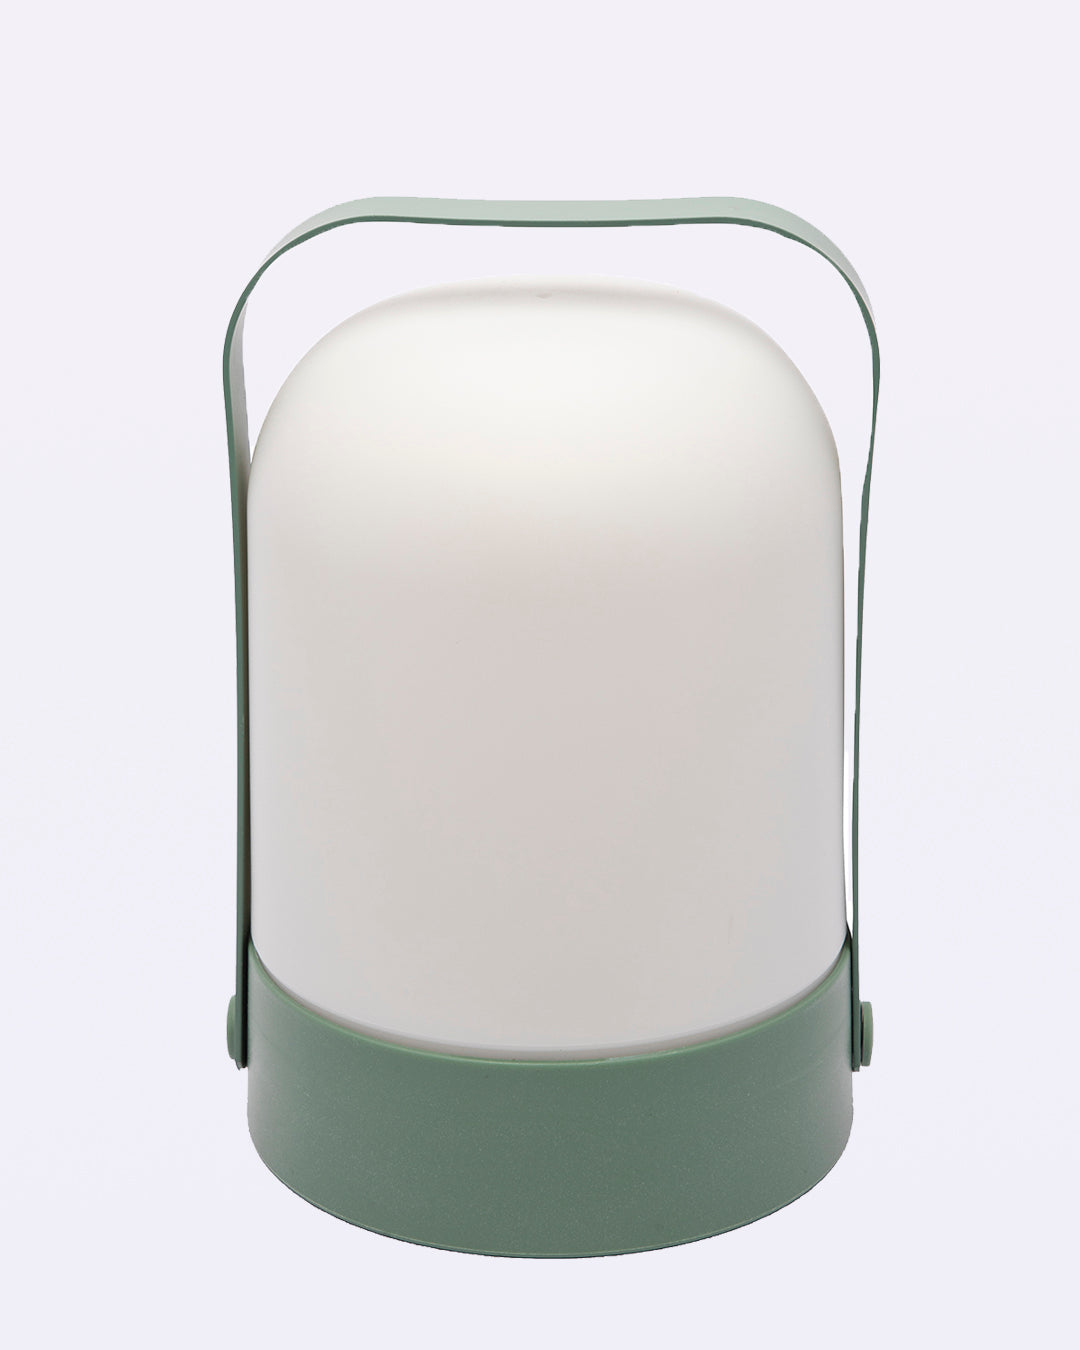 VON CASA Decorative Lantern, Lamp, Battery Operated, for Outdoor & Indoor Hanging, Table Decoration, Green, Plastic